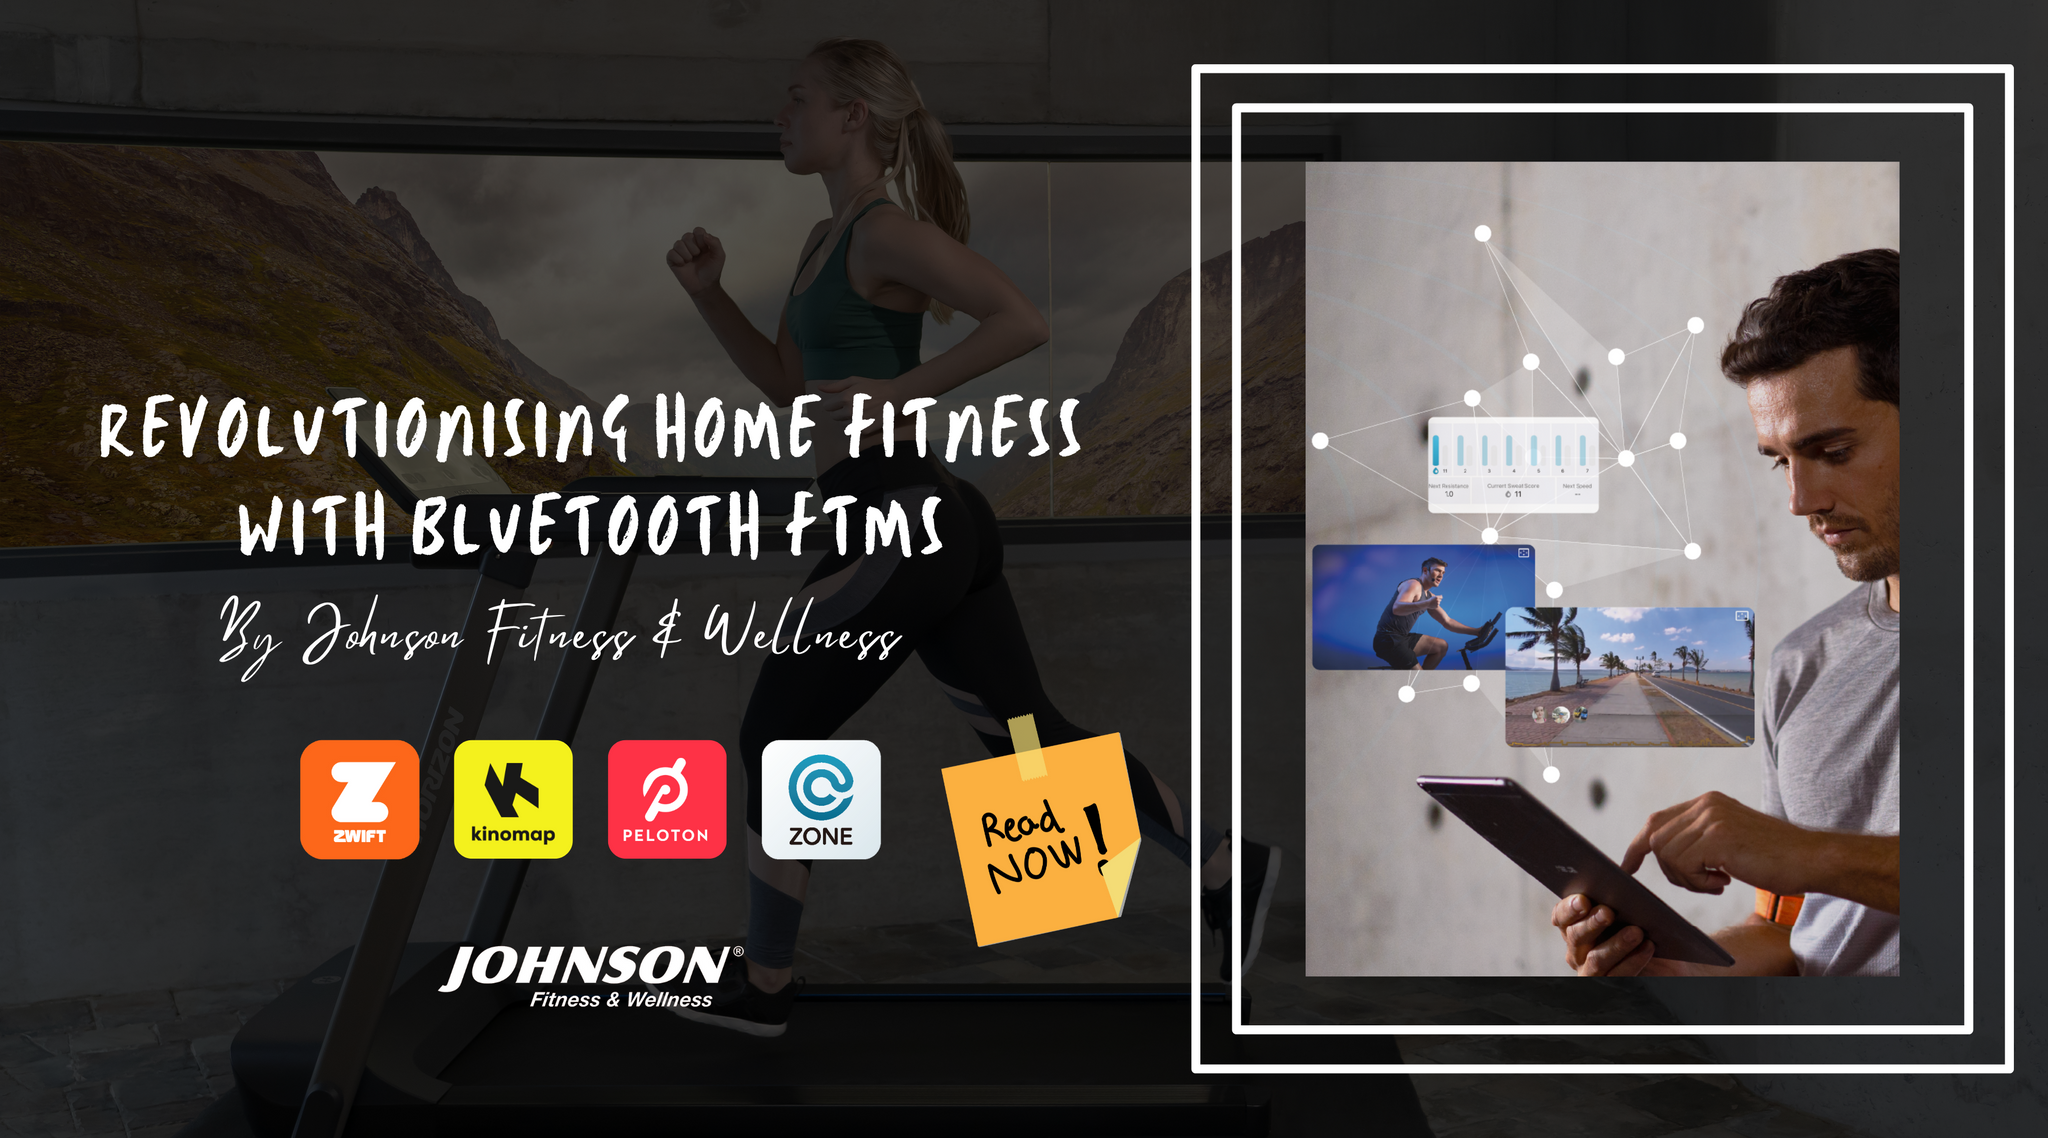 Revolutionising Home Fitness with Bluetooth FTMS